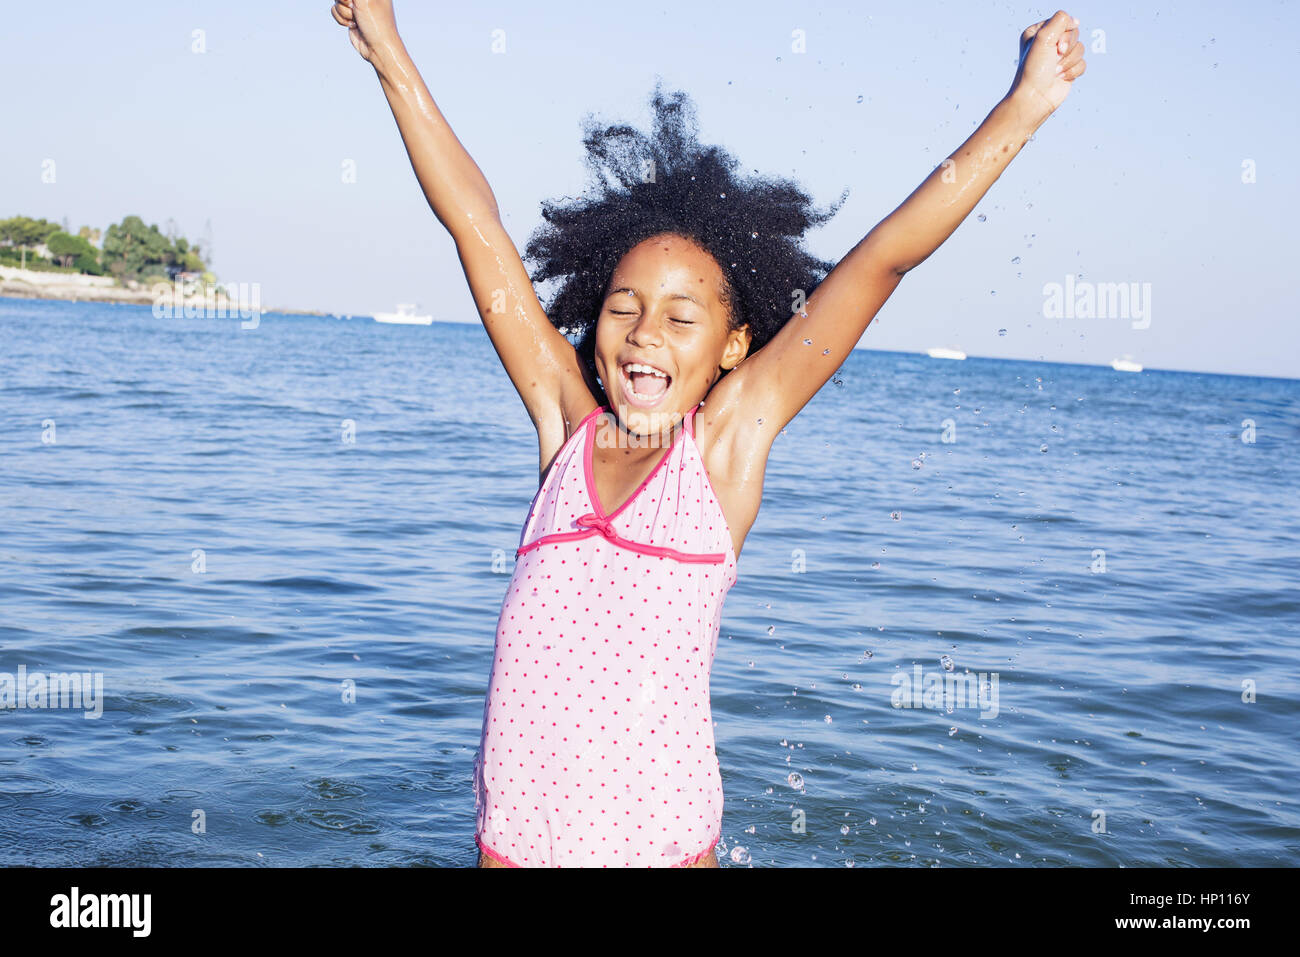 Girl in water raising arms with excitement Stock Photo